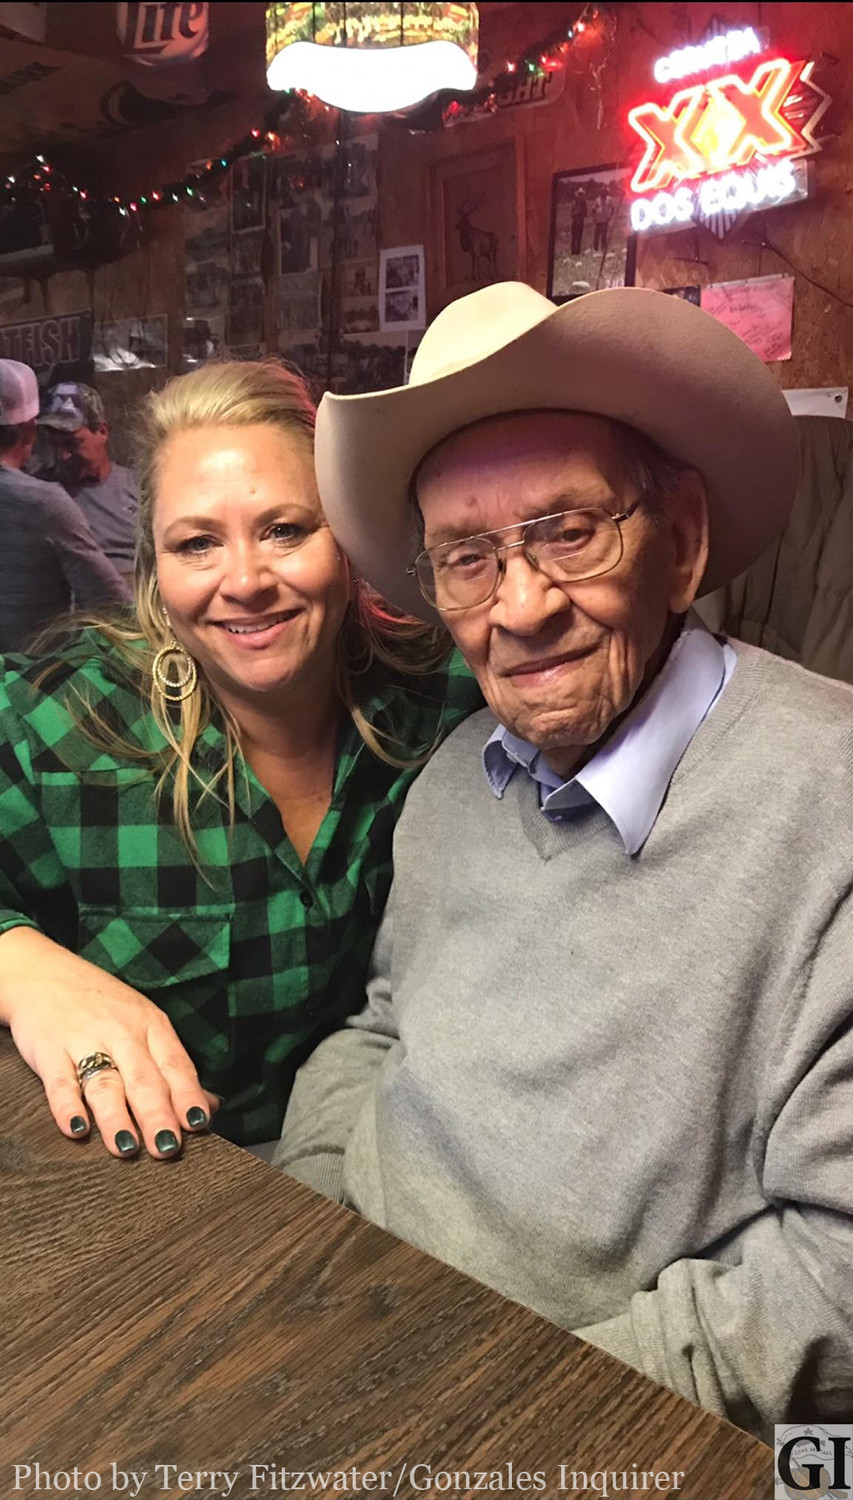 Pictured is Leanne Wilkerson with her father Bill May, who currently run Boomer’s Sports Bar. Boomer’s prides itself on many things, including making dinners for those who have nowhere to go on the major holidays.